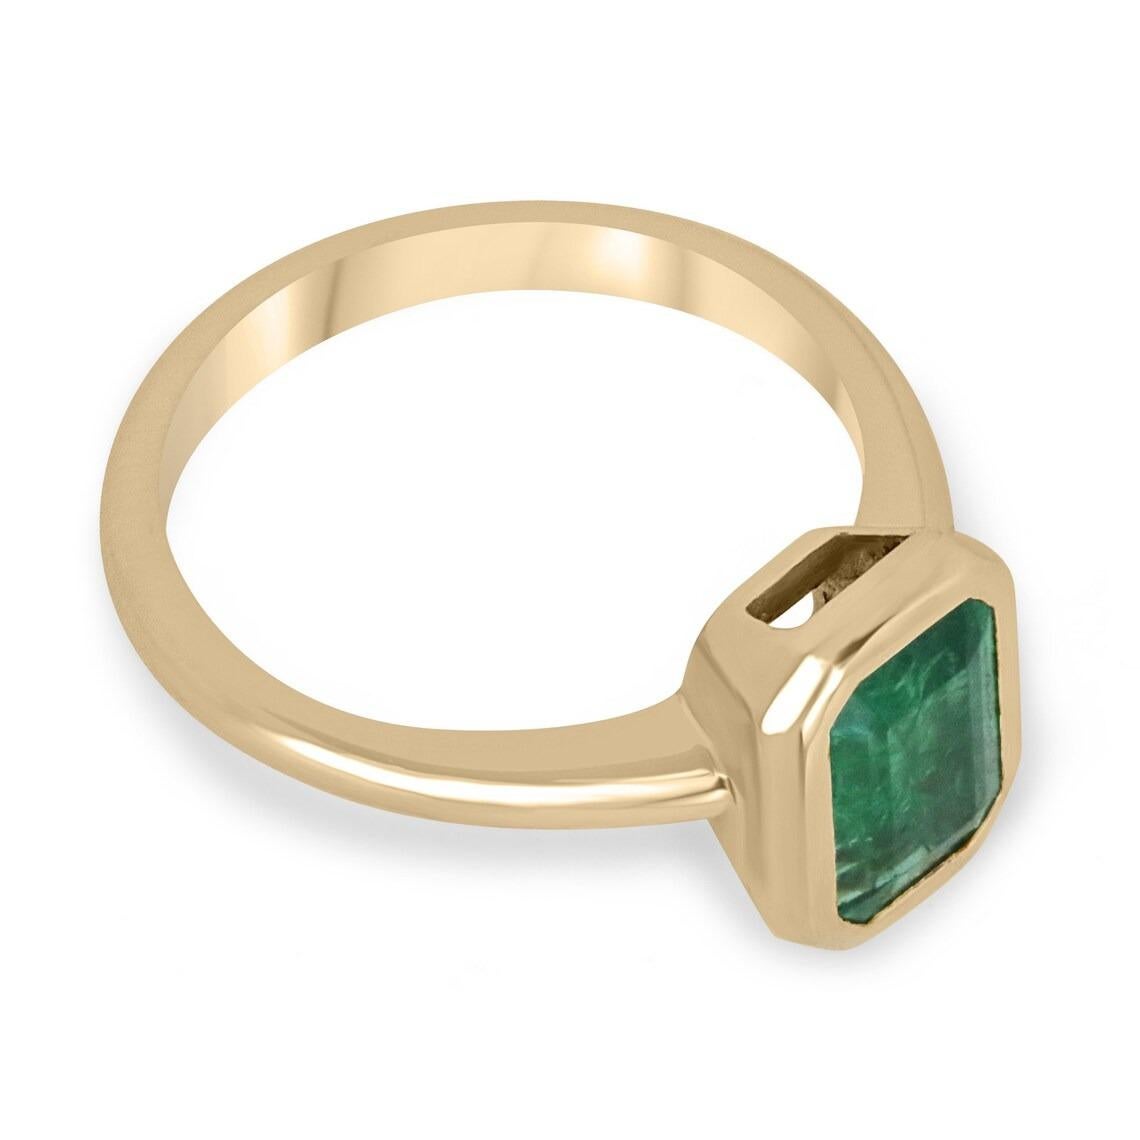 Displayed is a bespoke emerald solitaire emerald-cut engagement/right-hand ring in 14K yellow gold. This gorgeous solitaire ring carries an Emerald cut, emerald in a bezel setting. Fully faceted, this gemstone showcases excellent shine. The gem has